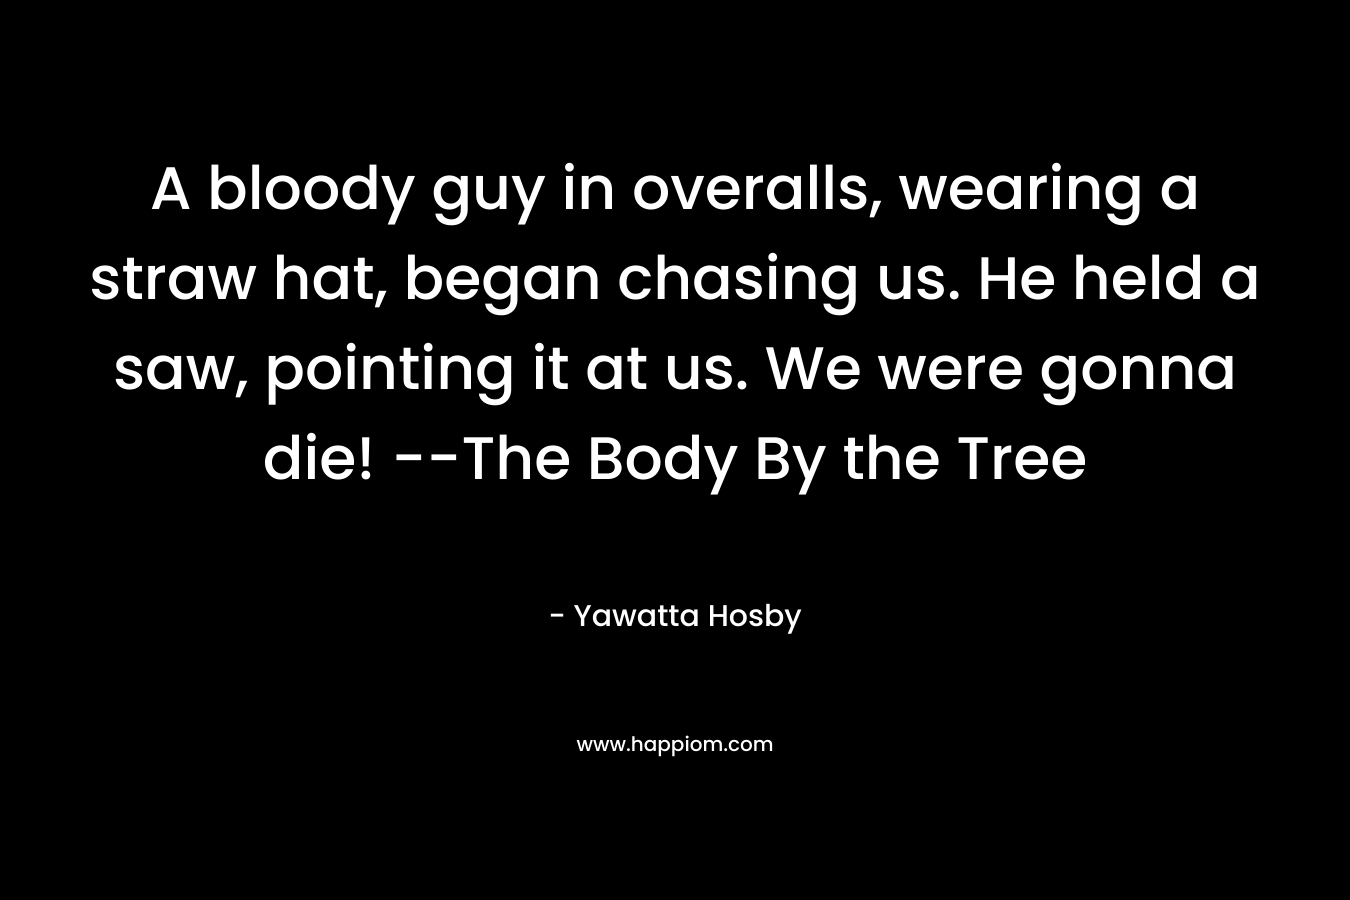 A bloody guy in overalls, wearing a straw hat, began chasing us. He held a saw, pointing it at us. We were gonna die! --The Body By the Tree